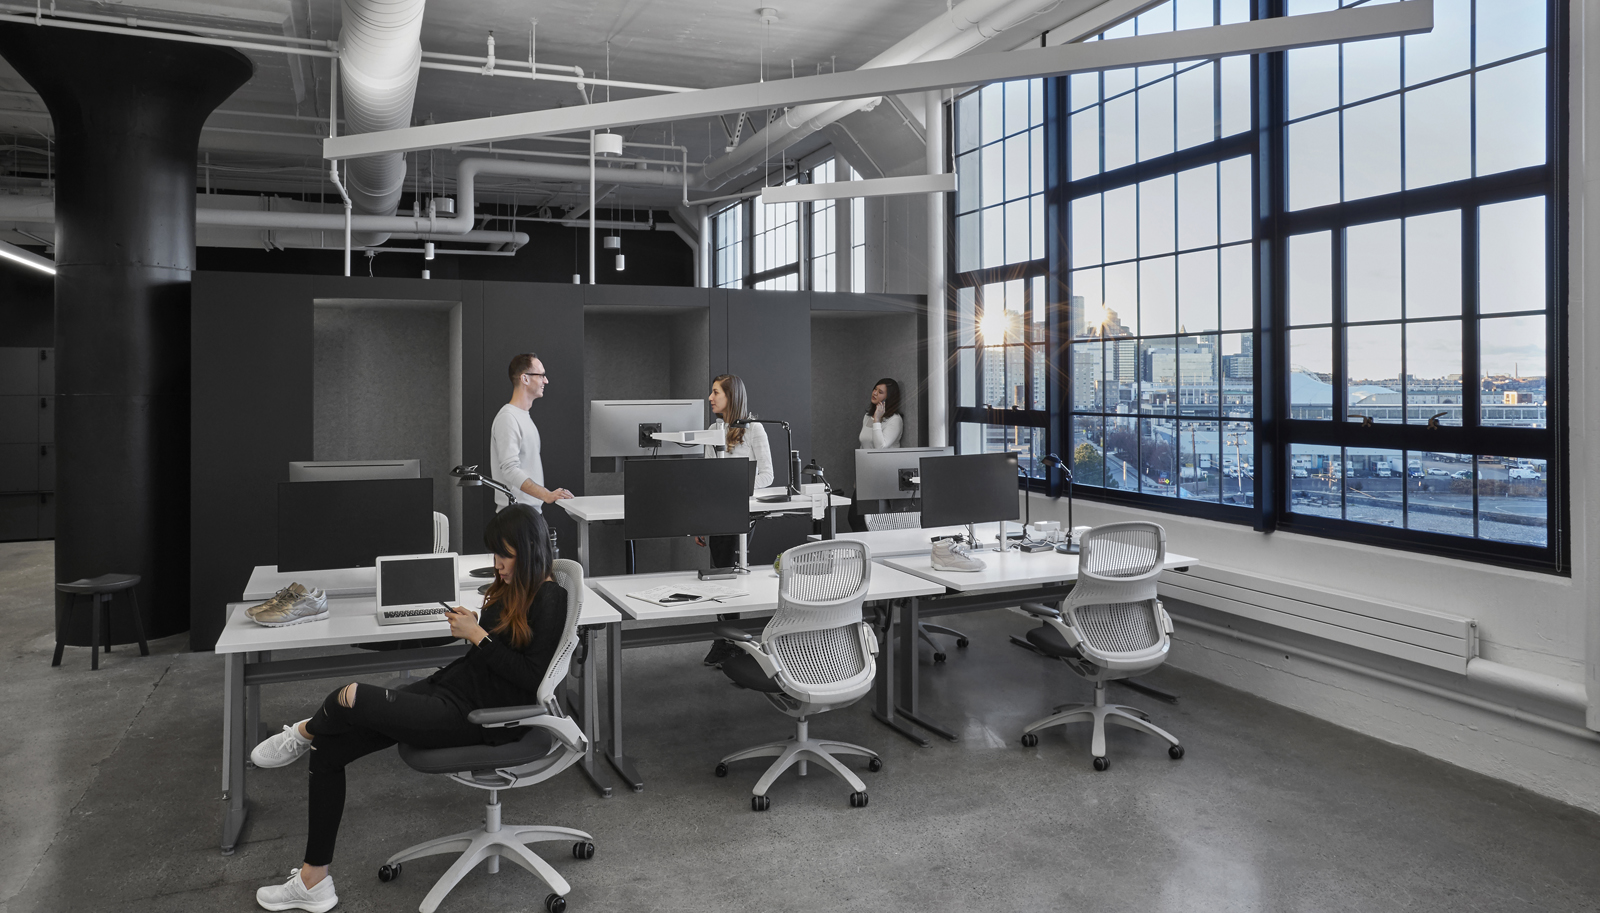 Reebok Headquarters Boston Interior, workstations with privacy rooms